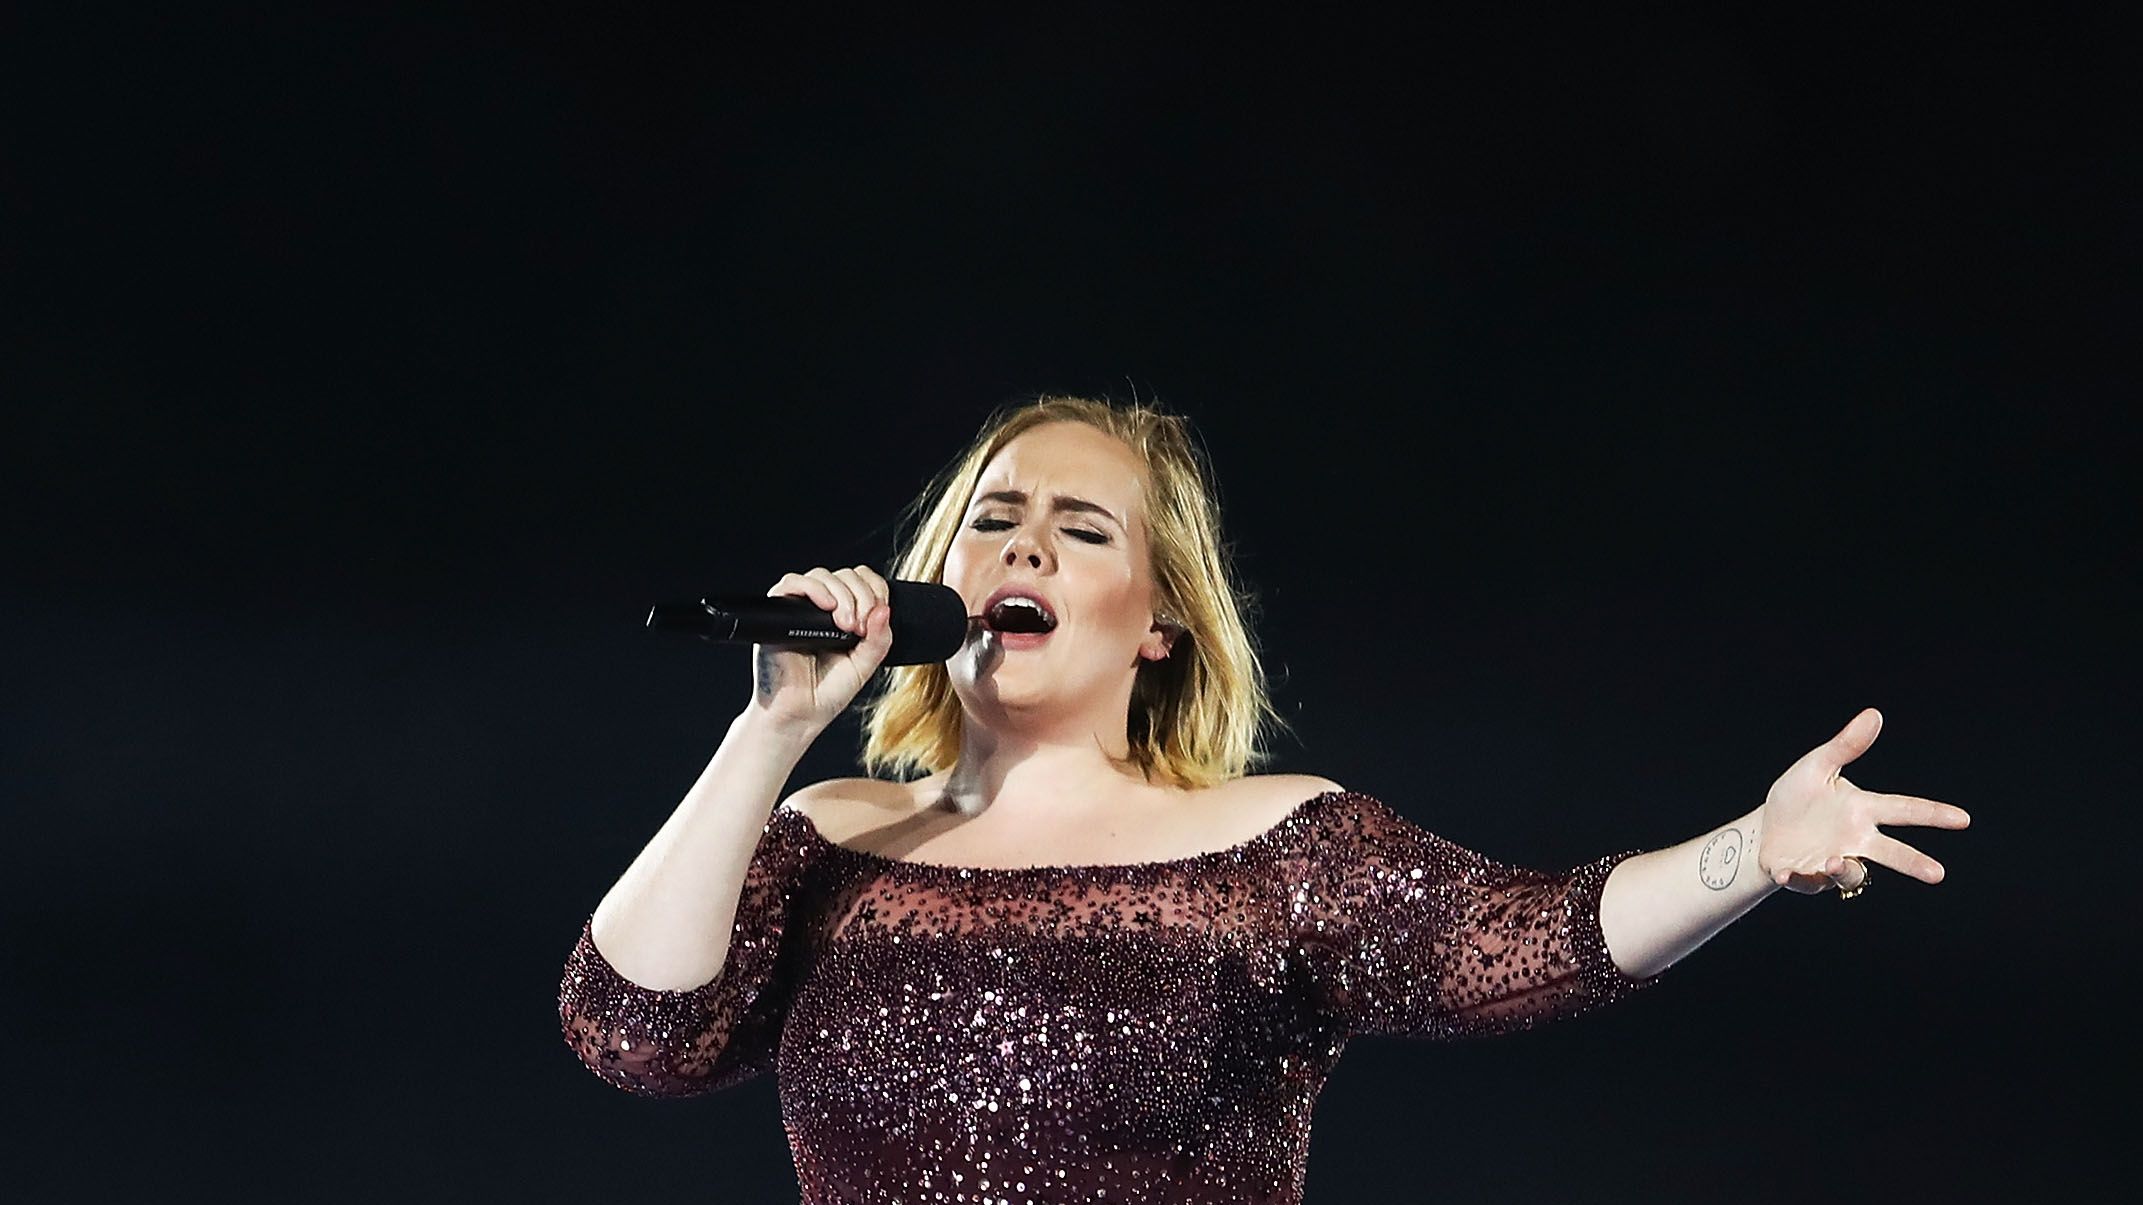 Adele Tells Stories Behind 'Easy on Me,' Chasing Pavements' in Video